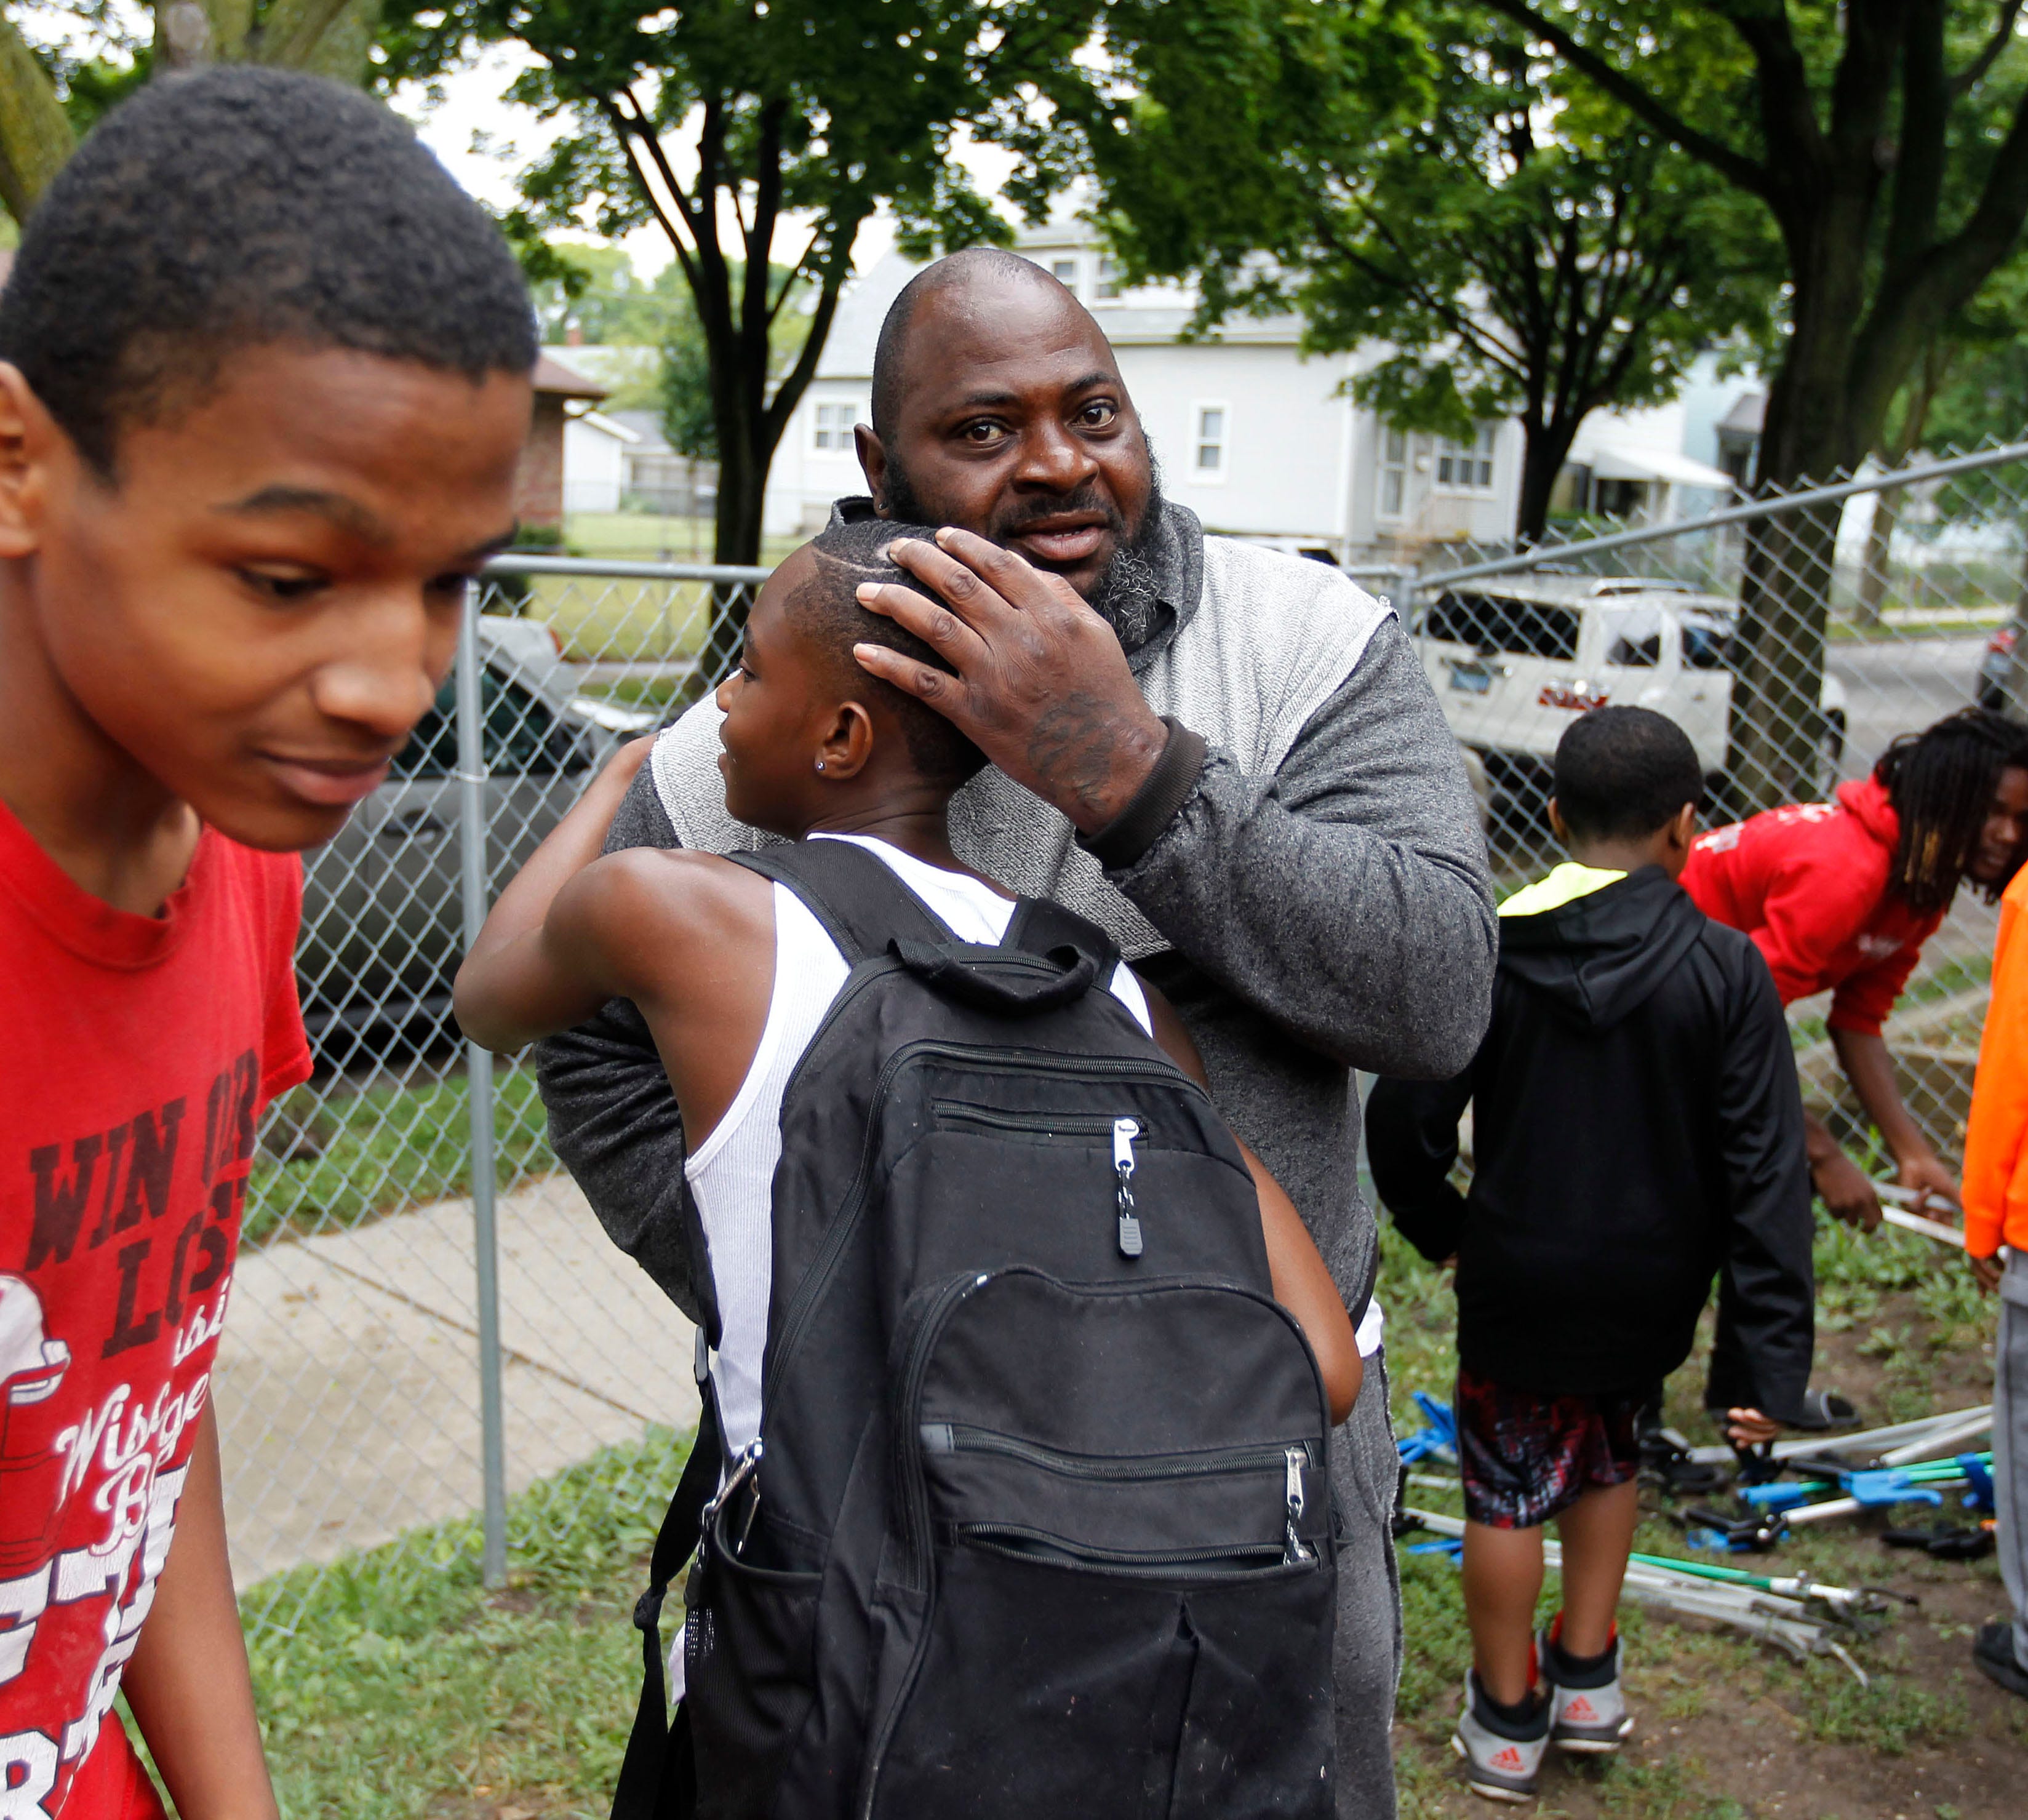 June Thomas greets a youth in 2018 at "We Got This," a program that mentors male youth through gardening and life lessons in Milwaukee.